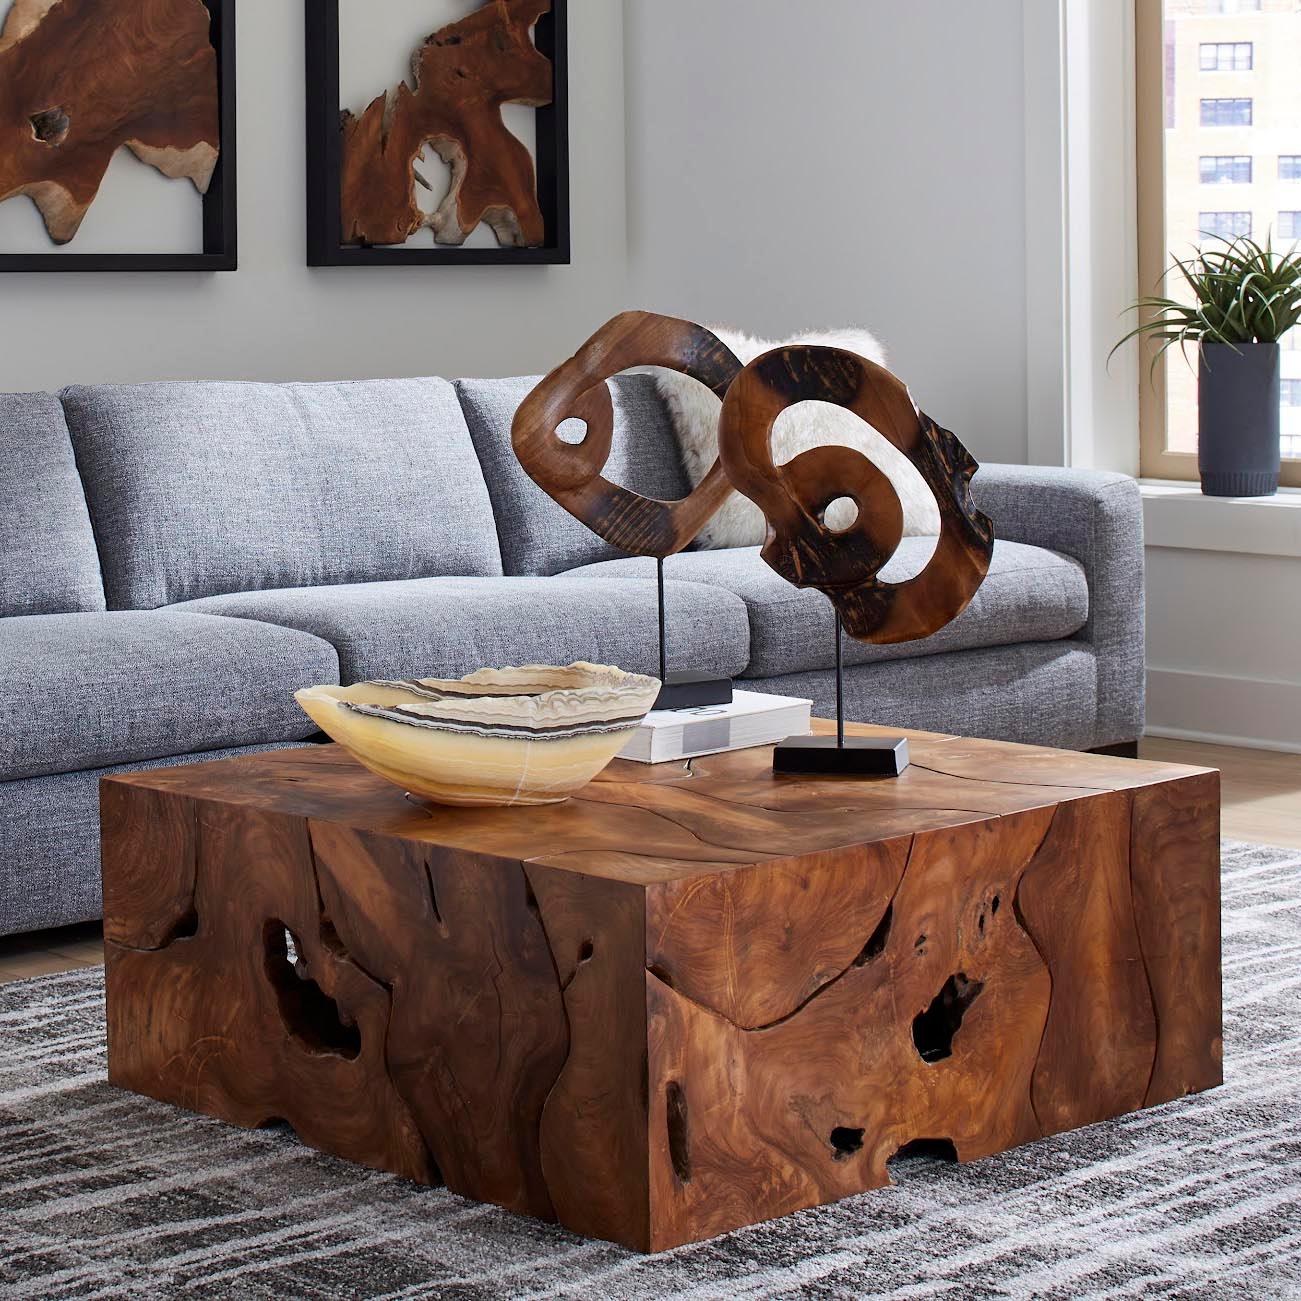 Phillips Collection FURNITURE - Teak Slice Coffee Table - Square